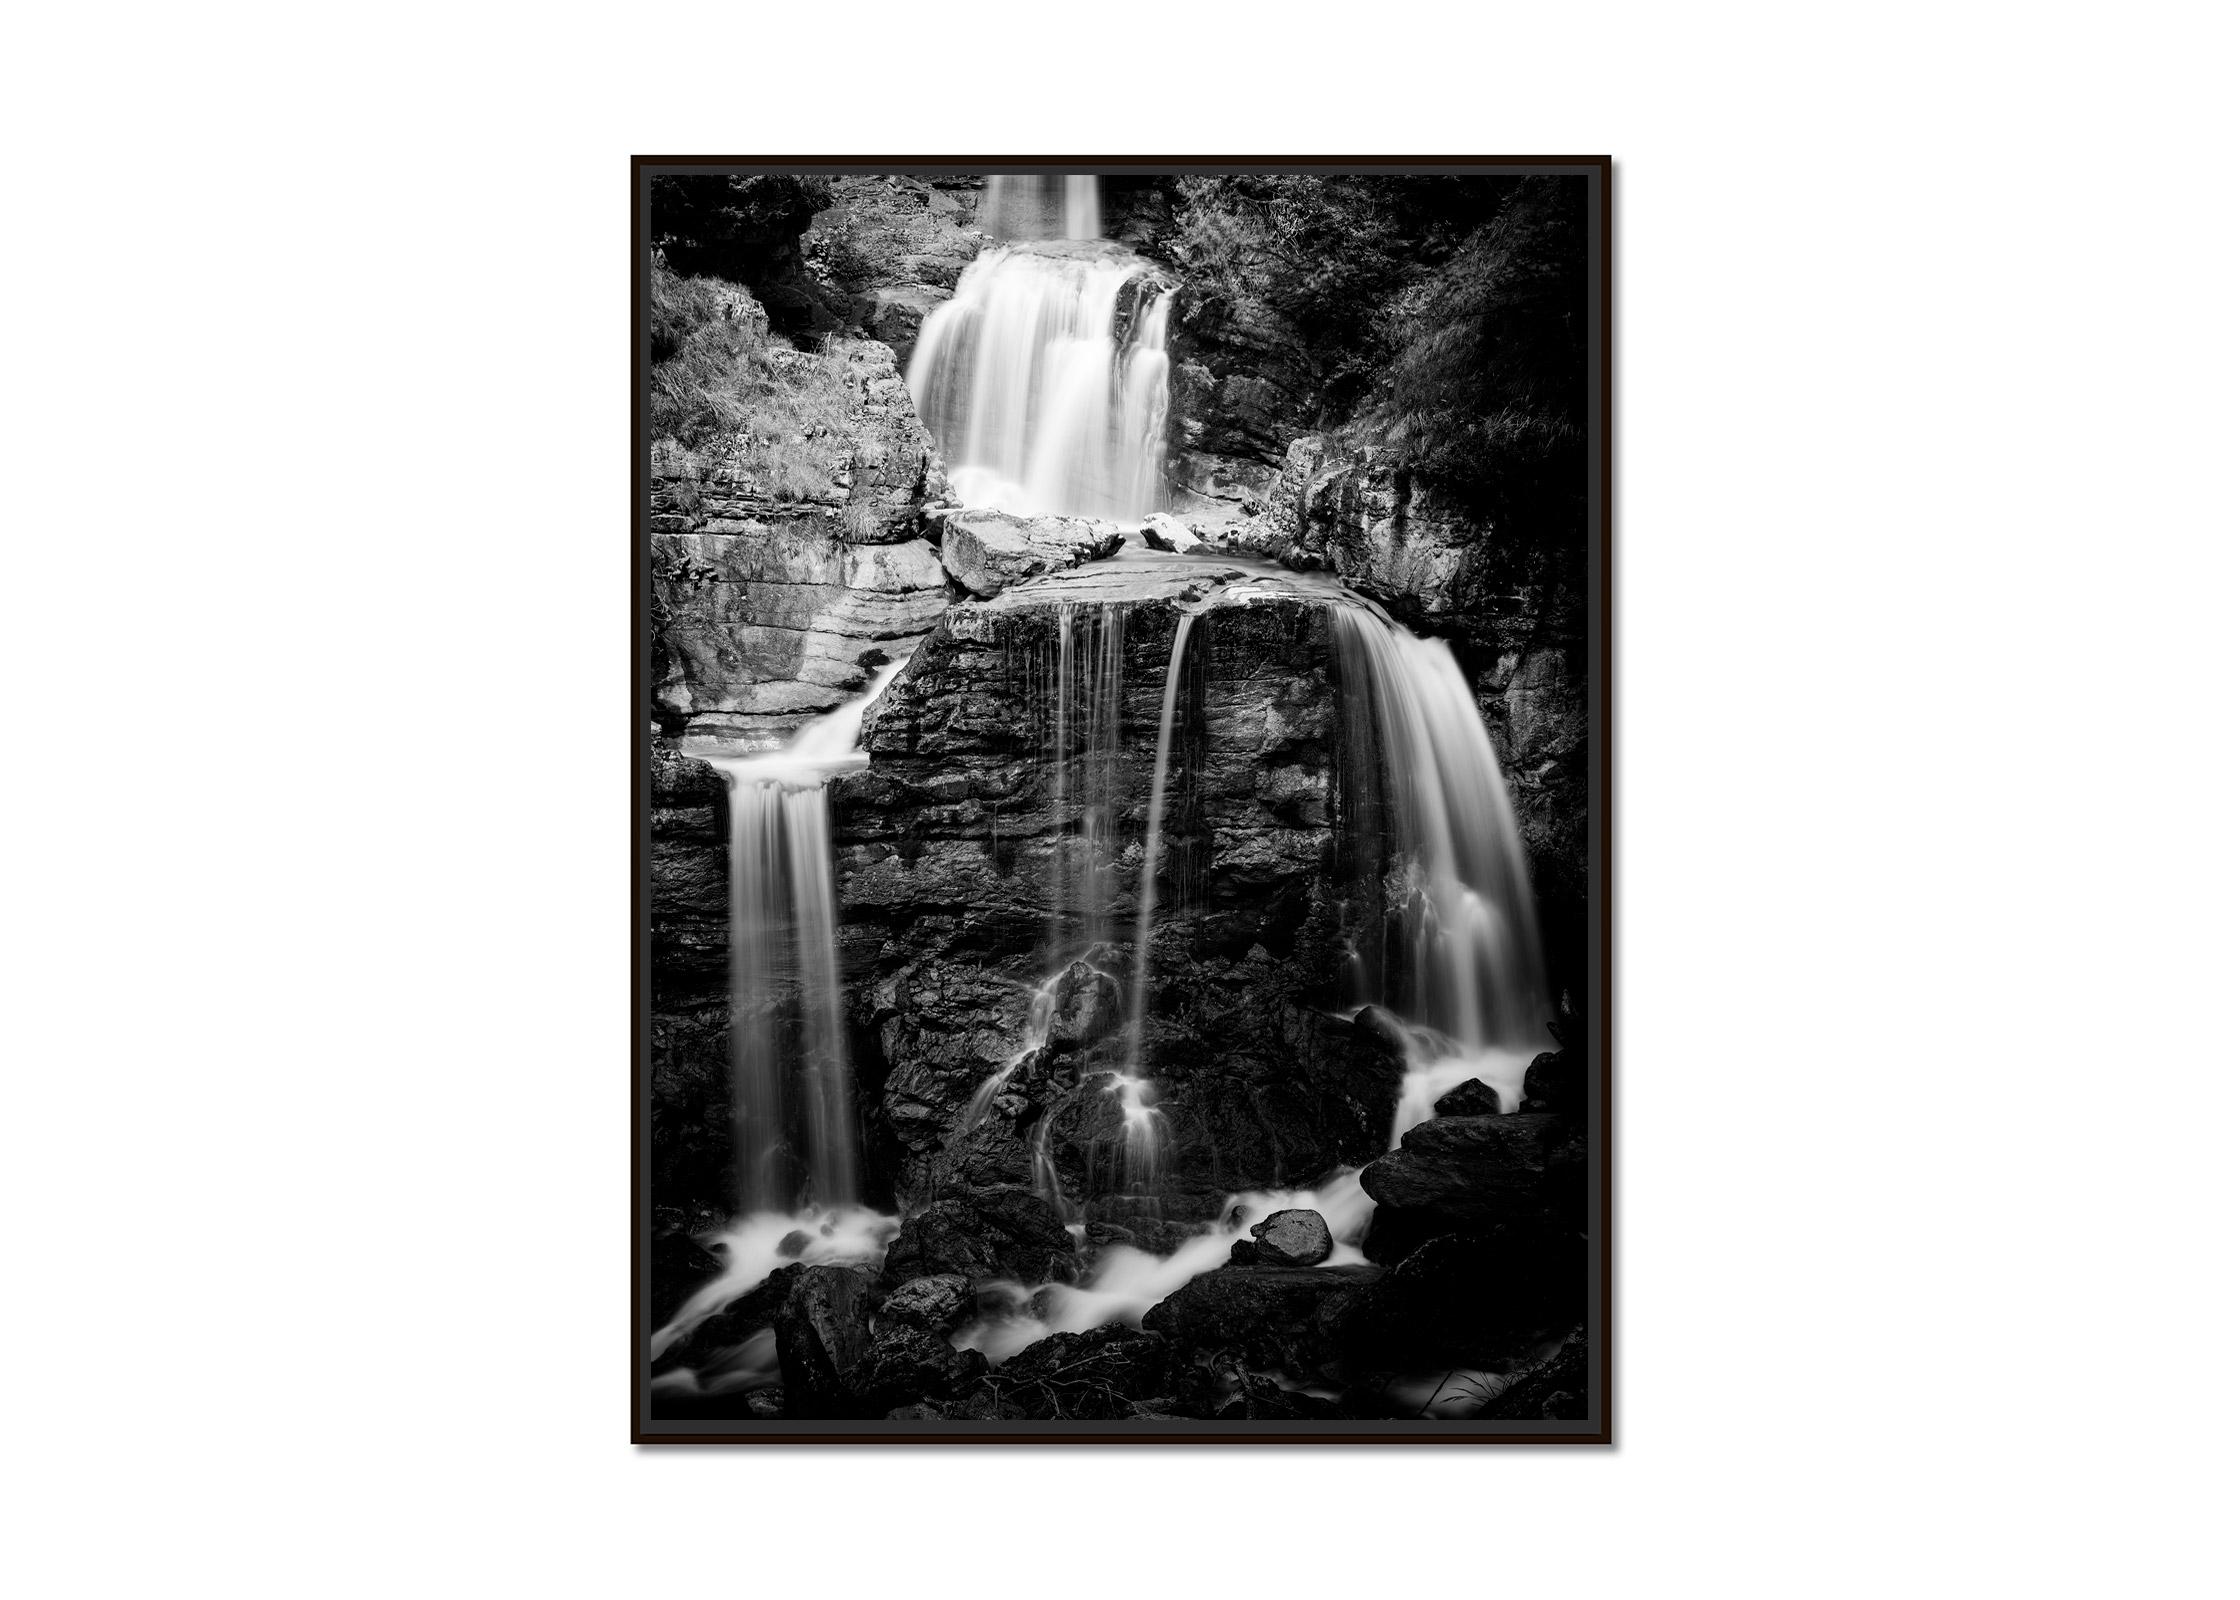 Kuhflucht, lower Waterfall, Germany, black and white art landscape photography - Photograph by Gerald Berghammer